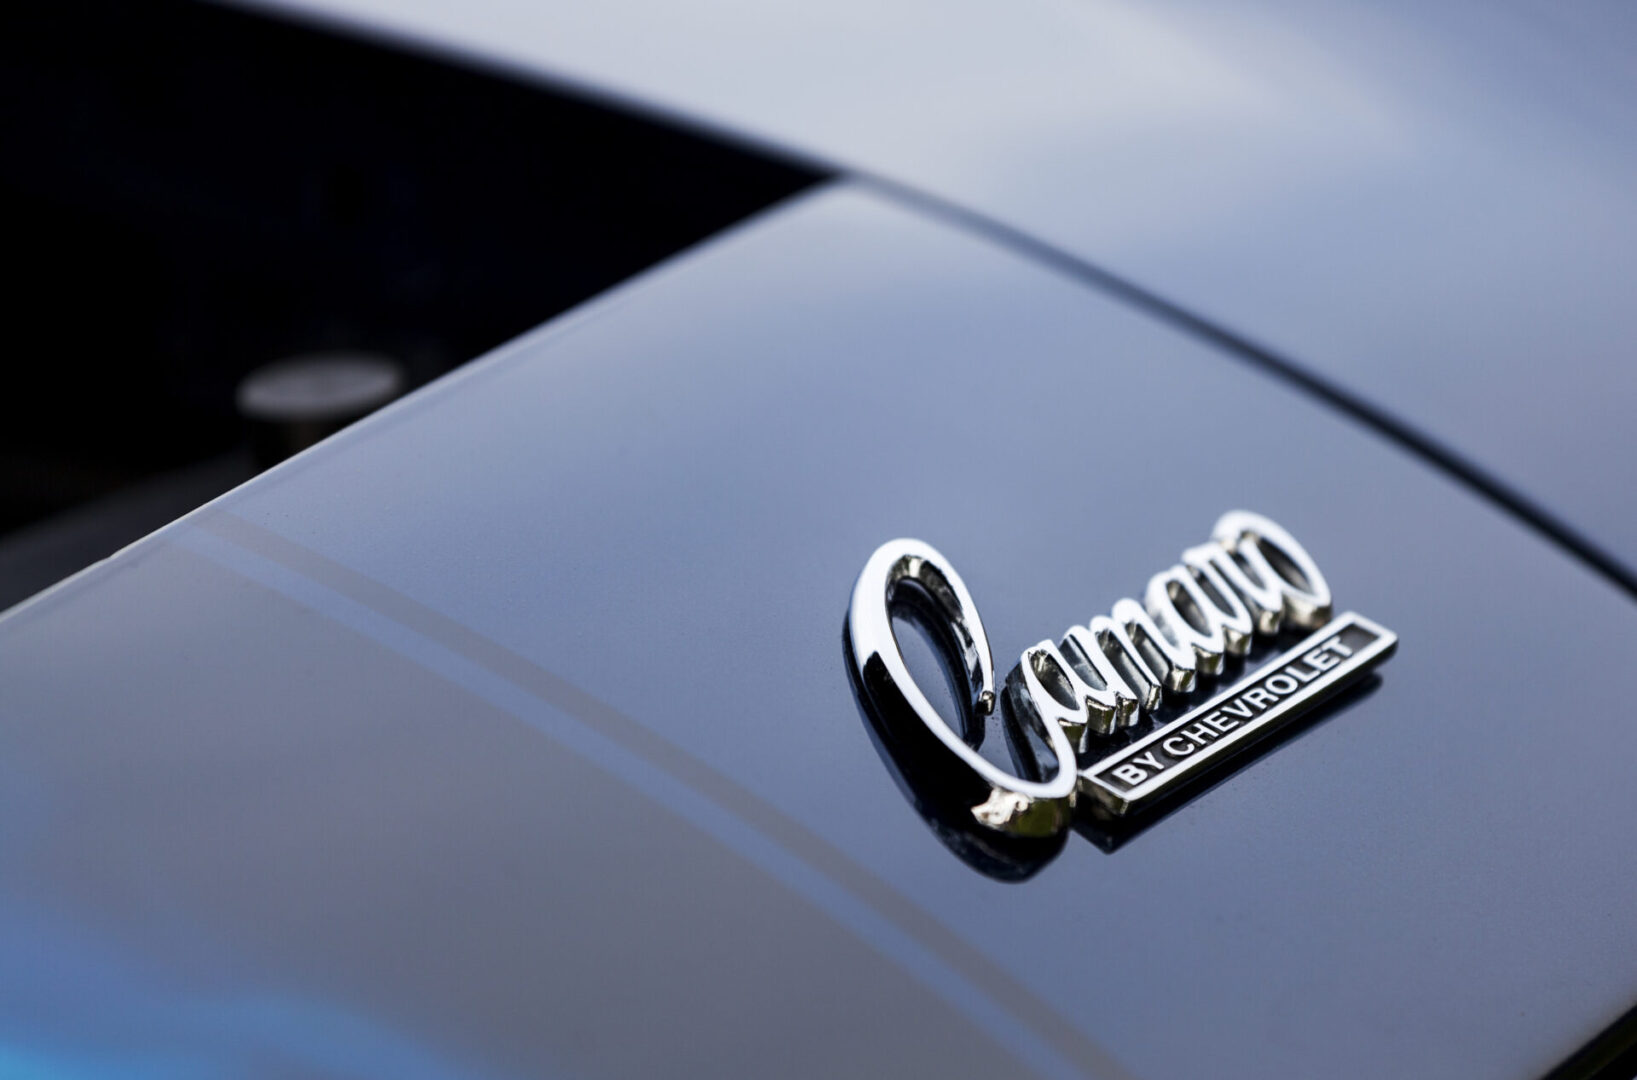 Bedford, Nova Scotia, Canada - June 28, 2011: Chevrolet Camaro emblem (Camaro by Chevrolet) on hood of vehicle.  Ahead of logo the engine bay is open and visible.  The Camaro was first introduced in 1966 and is currently in its fifth generation (as of 2011).